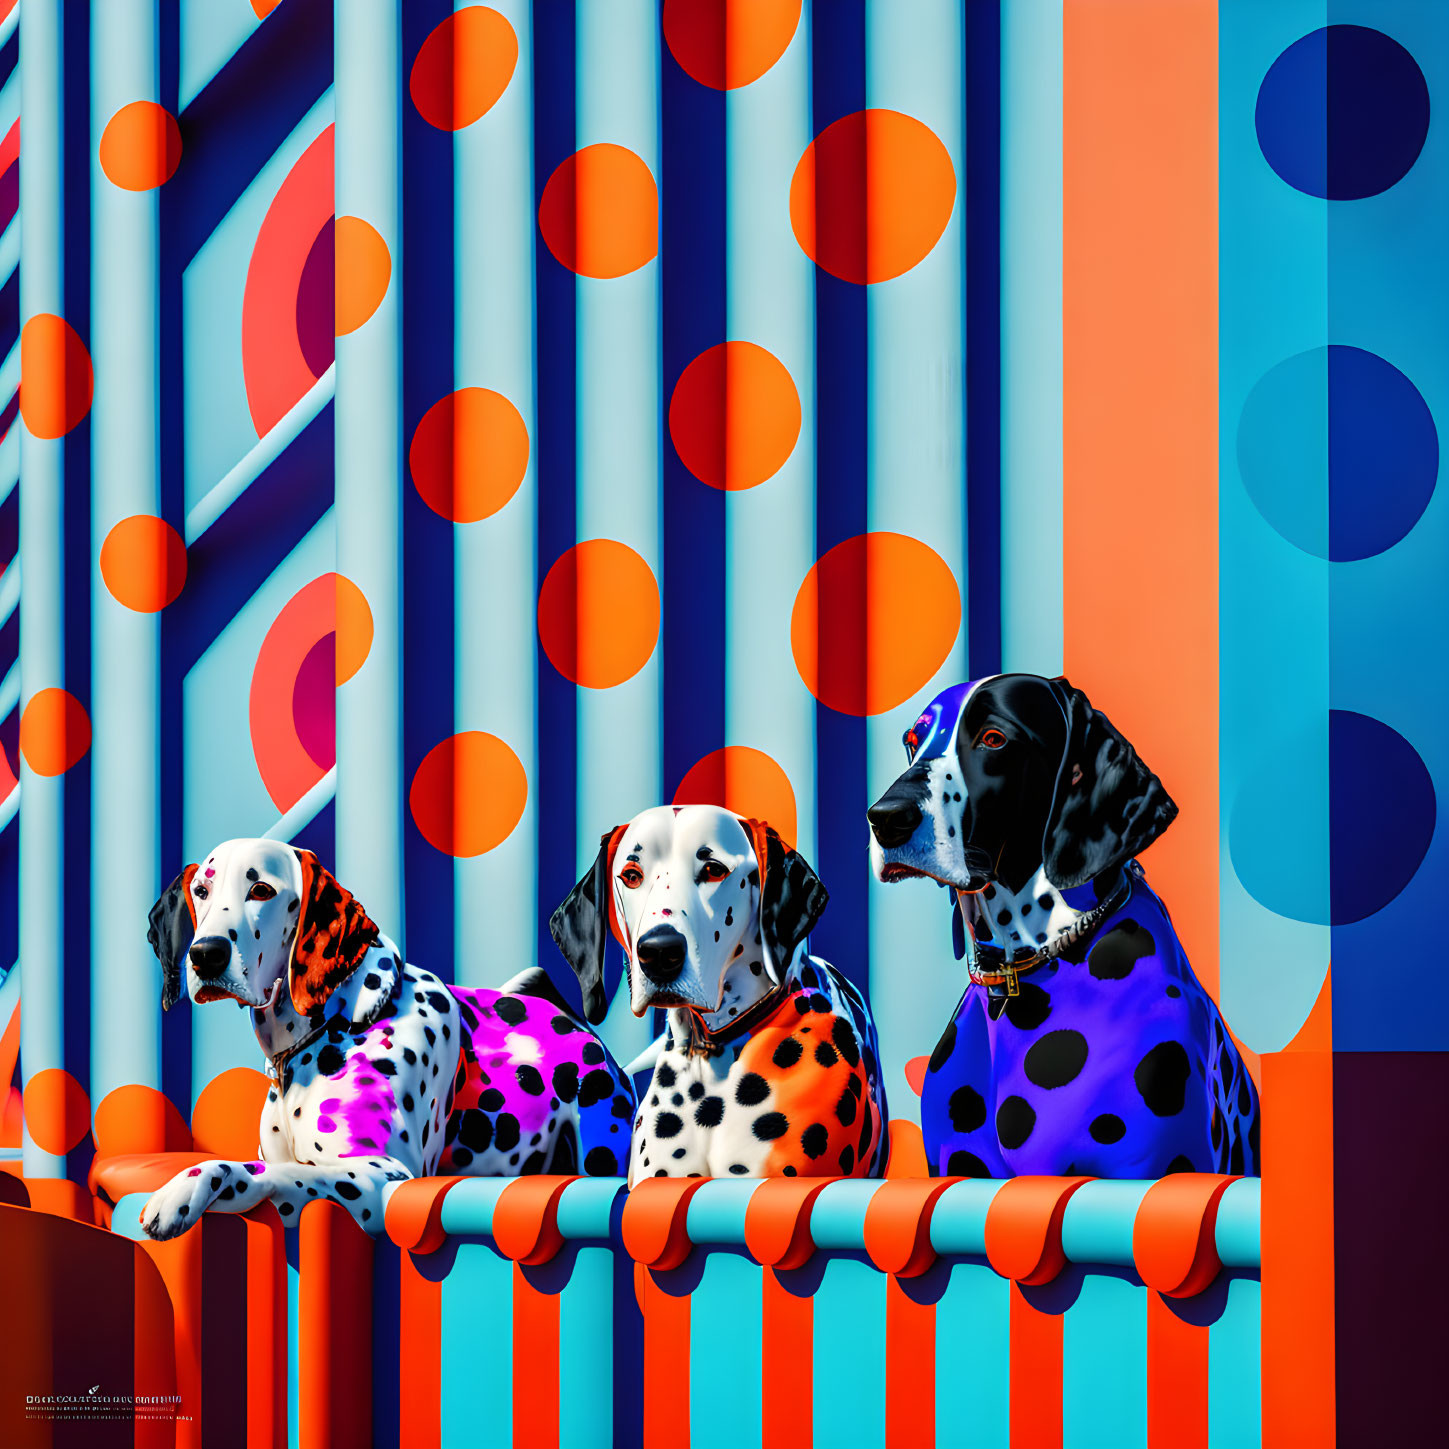 Three Dalmatians with colorful spots on patterned background